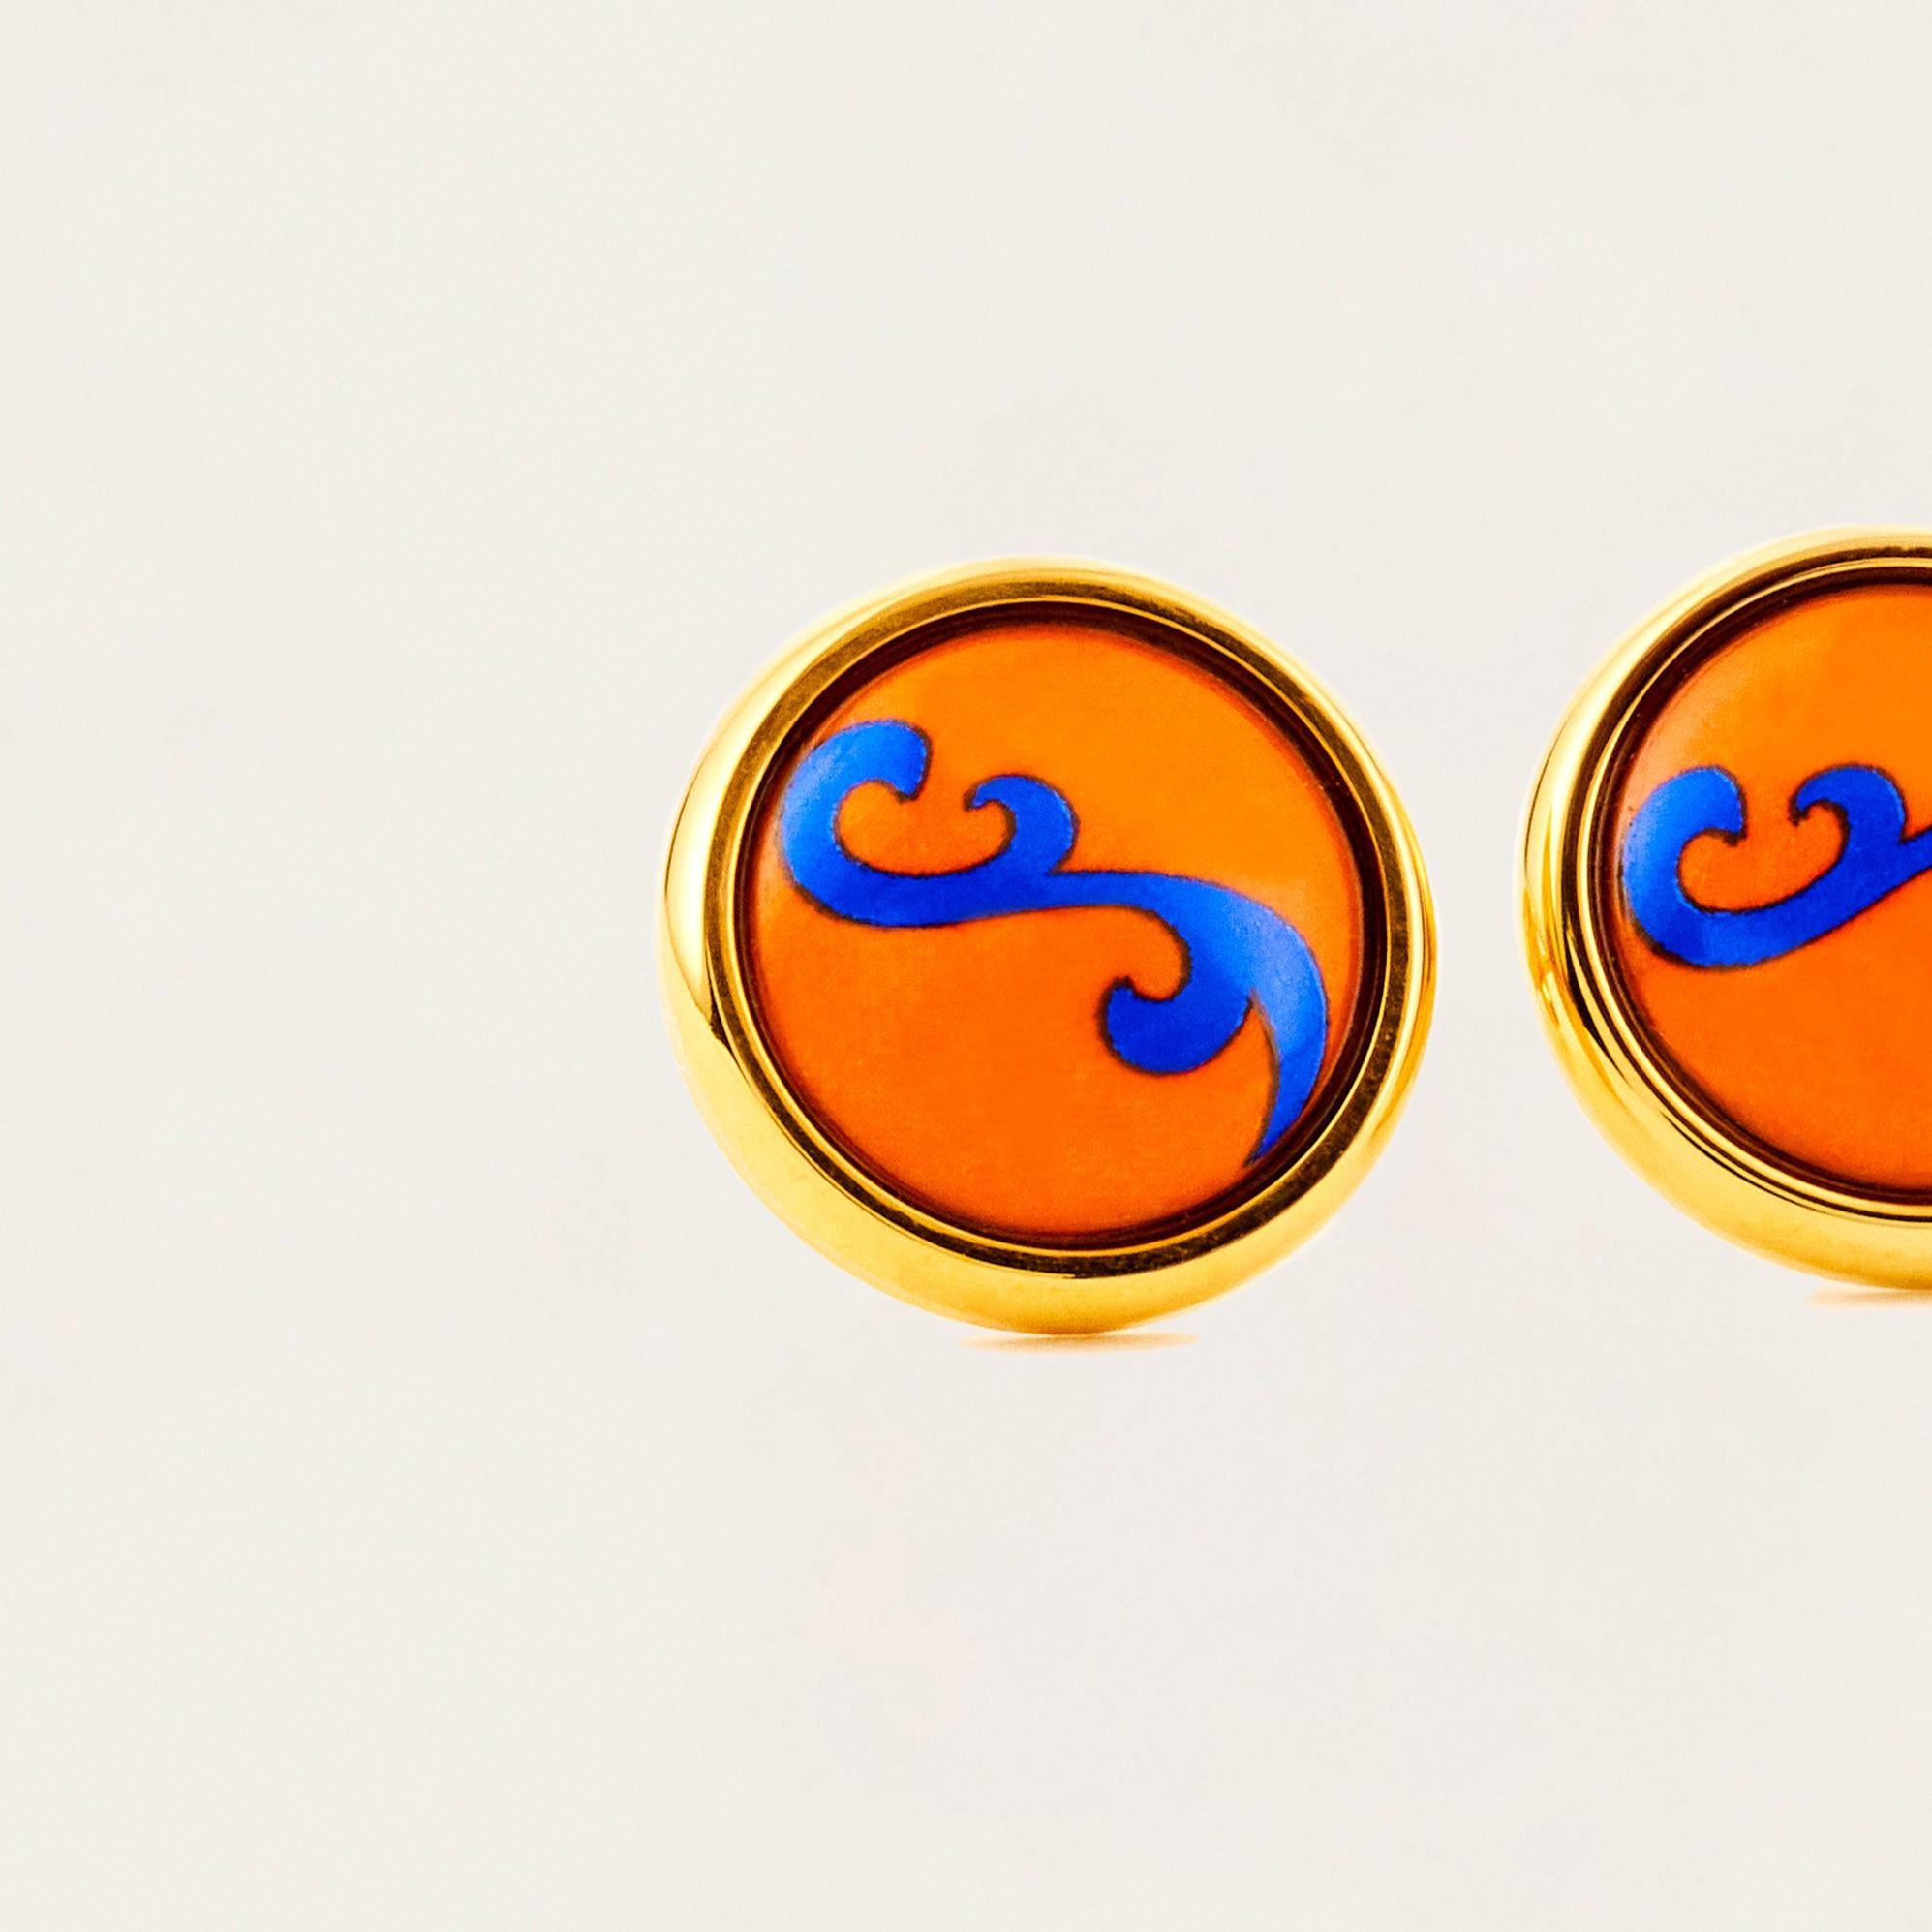 Contemporary Hand Painted Orange Gold Plated Stainless Steel Stud Earrings Fire Enamel Detail For Sale